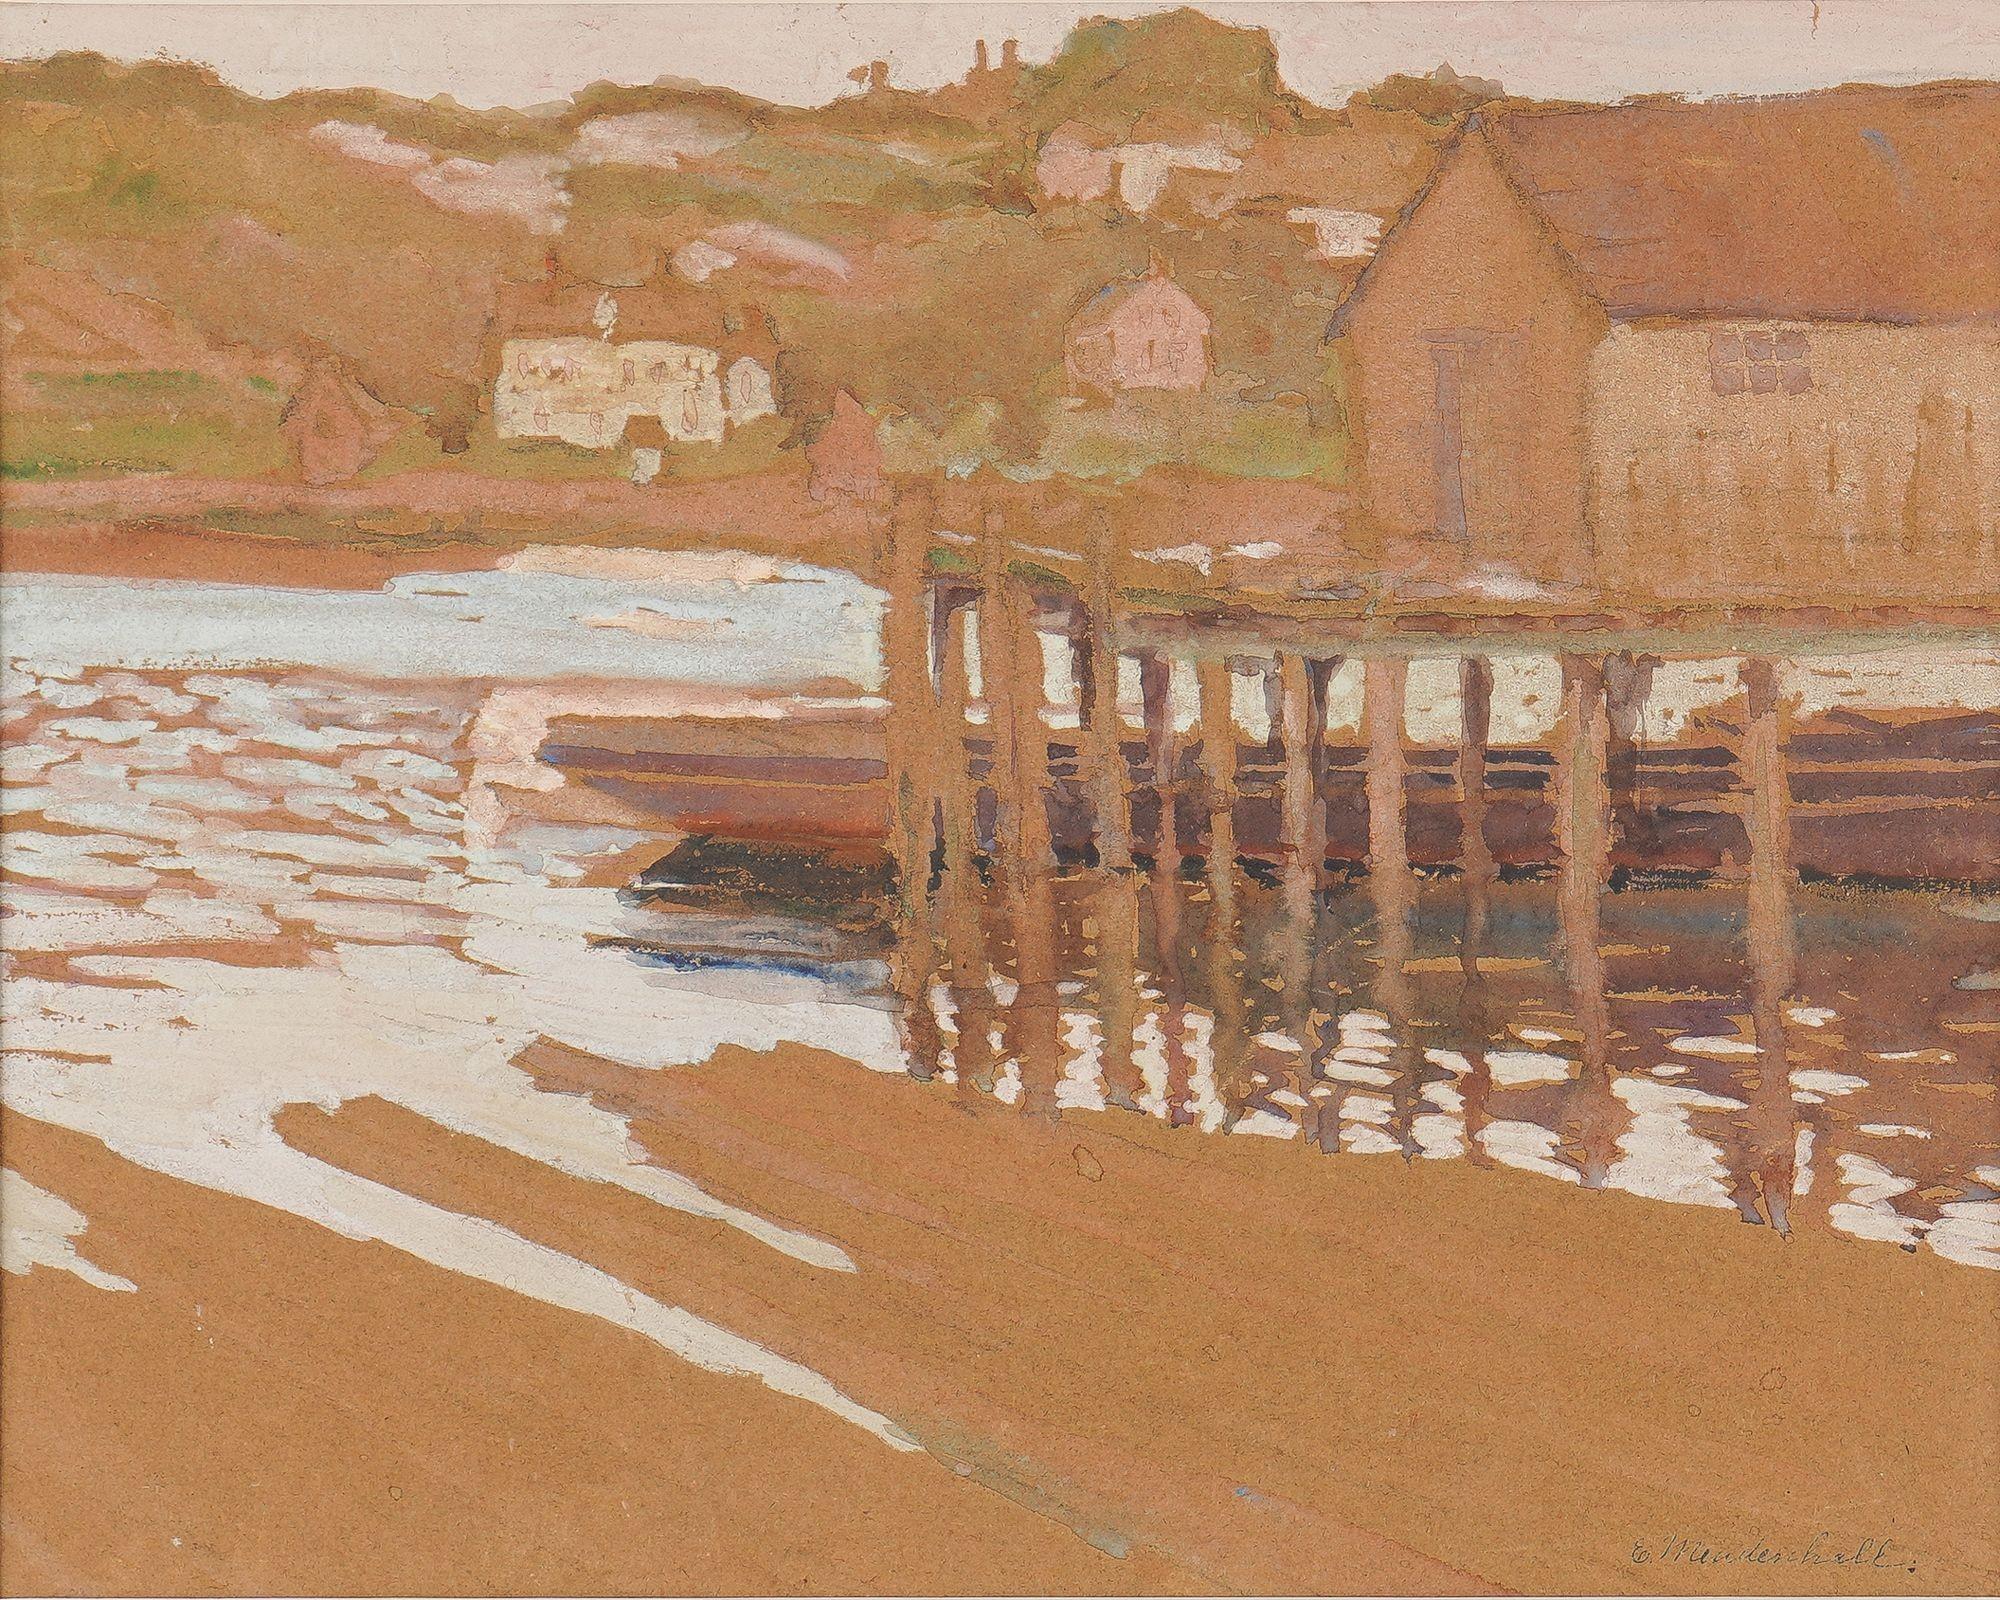 Cincinnati School gouache on laid paper by Emma Mendenhall (1873-1964) of waterside piers and fish house number one in Rockport, Massachusetts. Archival mat and mounted under UV filtering glass.

Signed in graphite, lower right: E